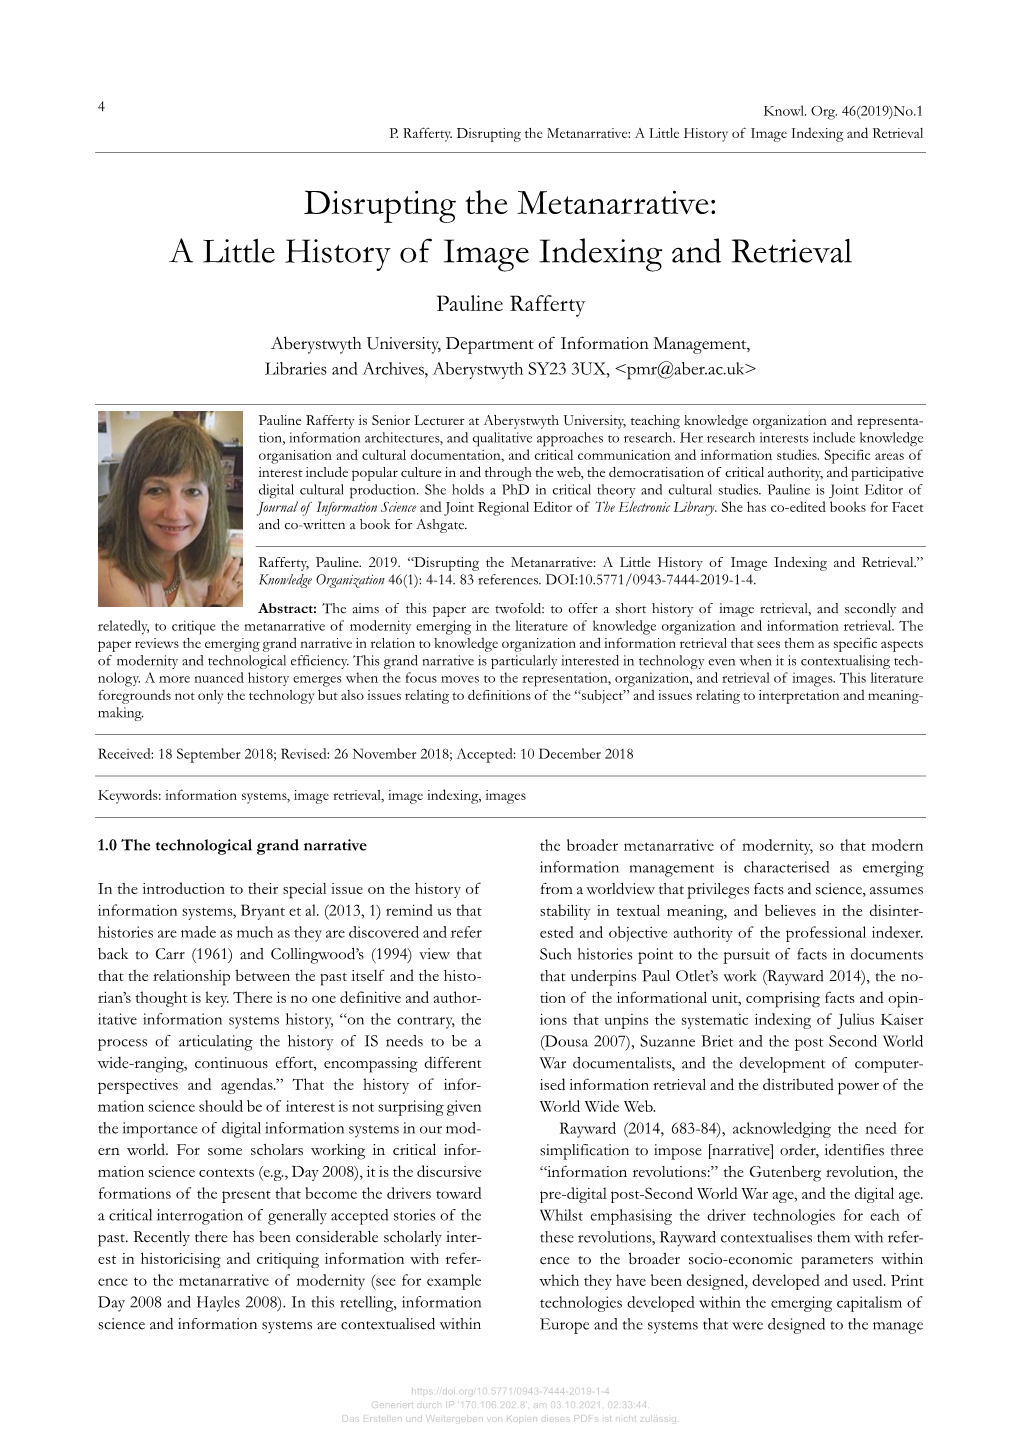 Disrupting the Metanarrative: a Little History of Image Indexing and Retrieval